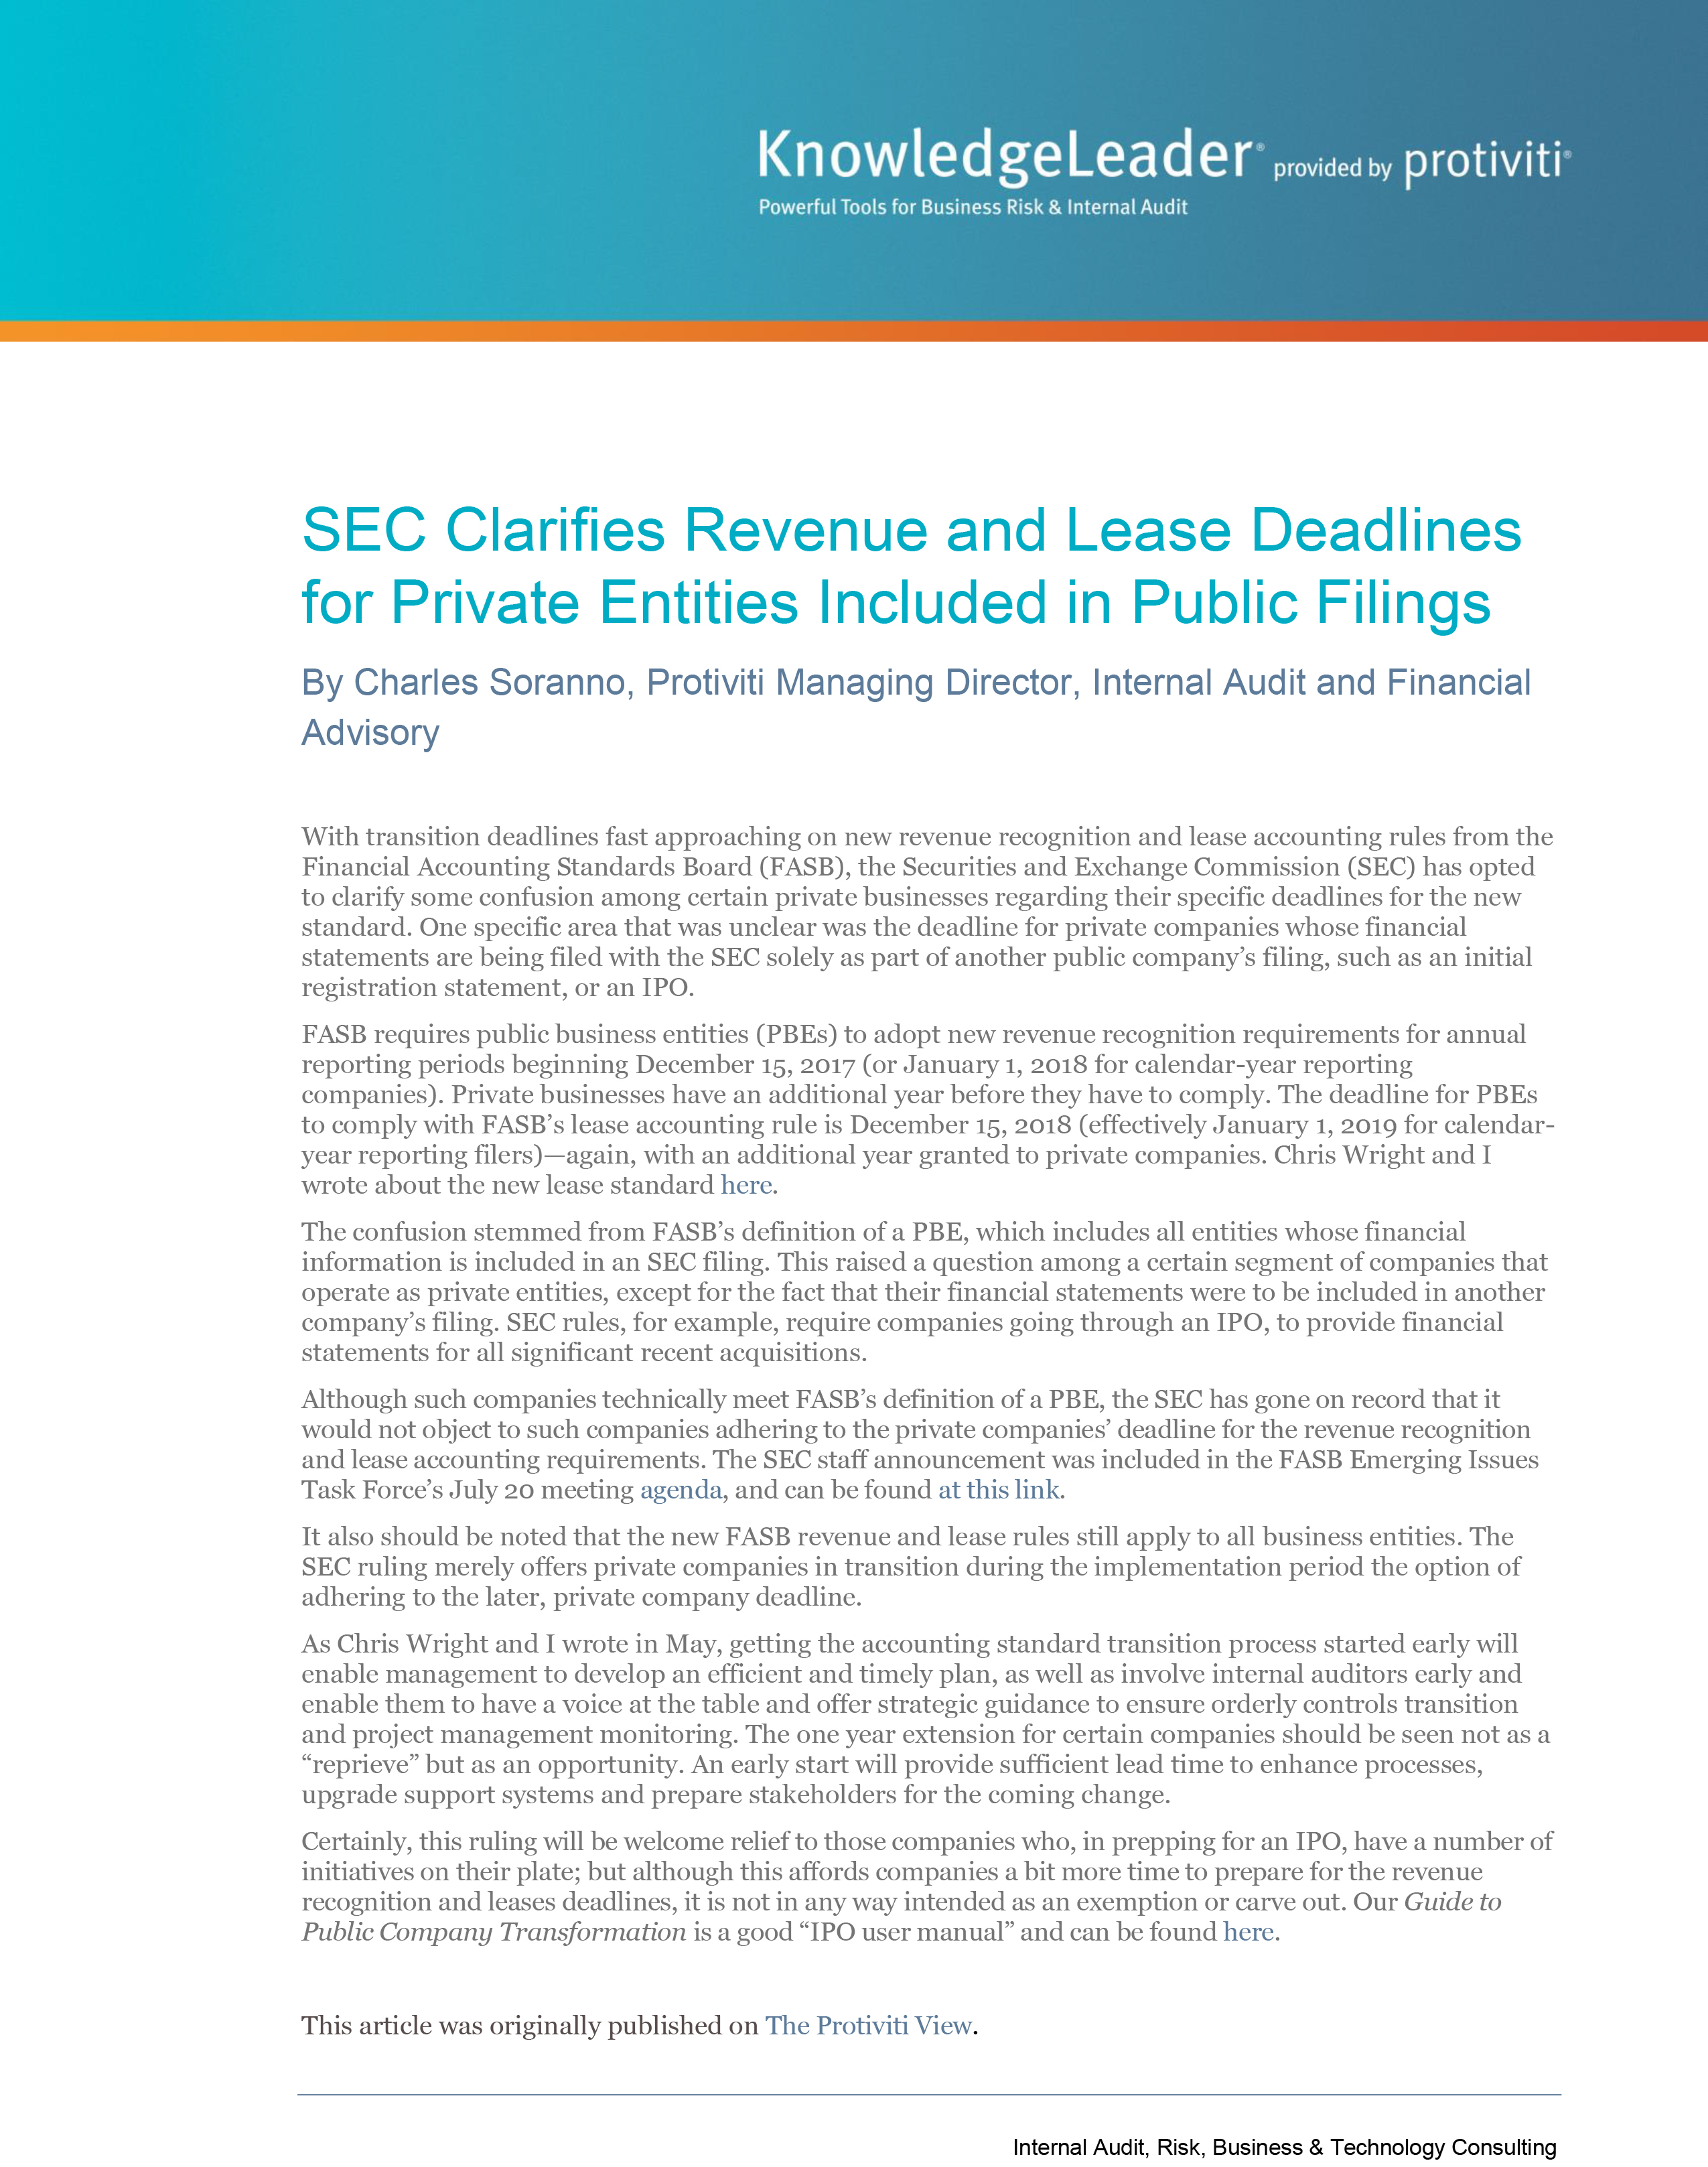 Screenshot of the first page of SEC Clarifies Revenue and Lease Deadlines for Private Entities Included in Public Filings